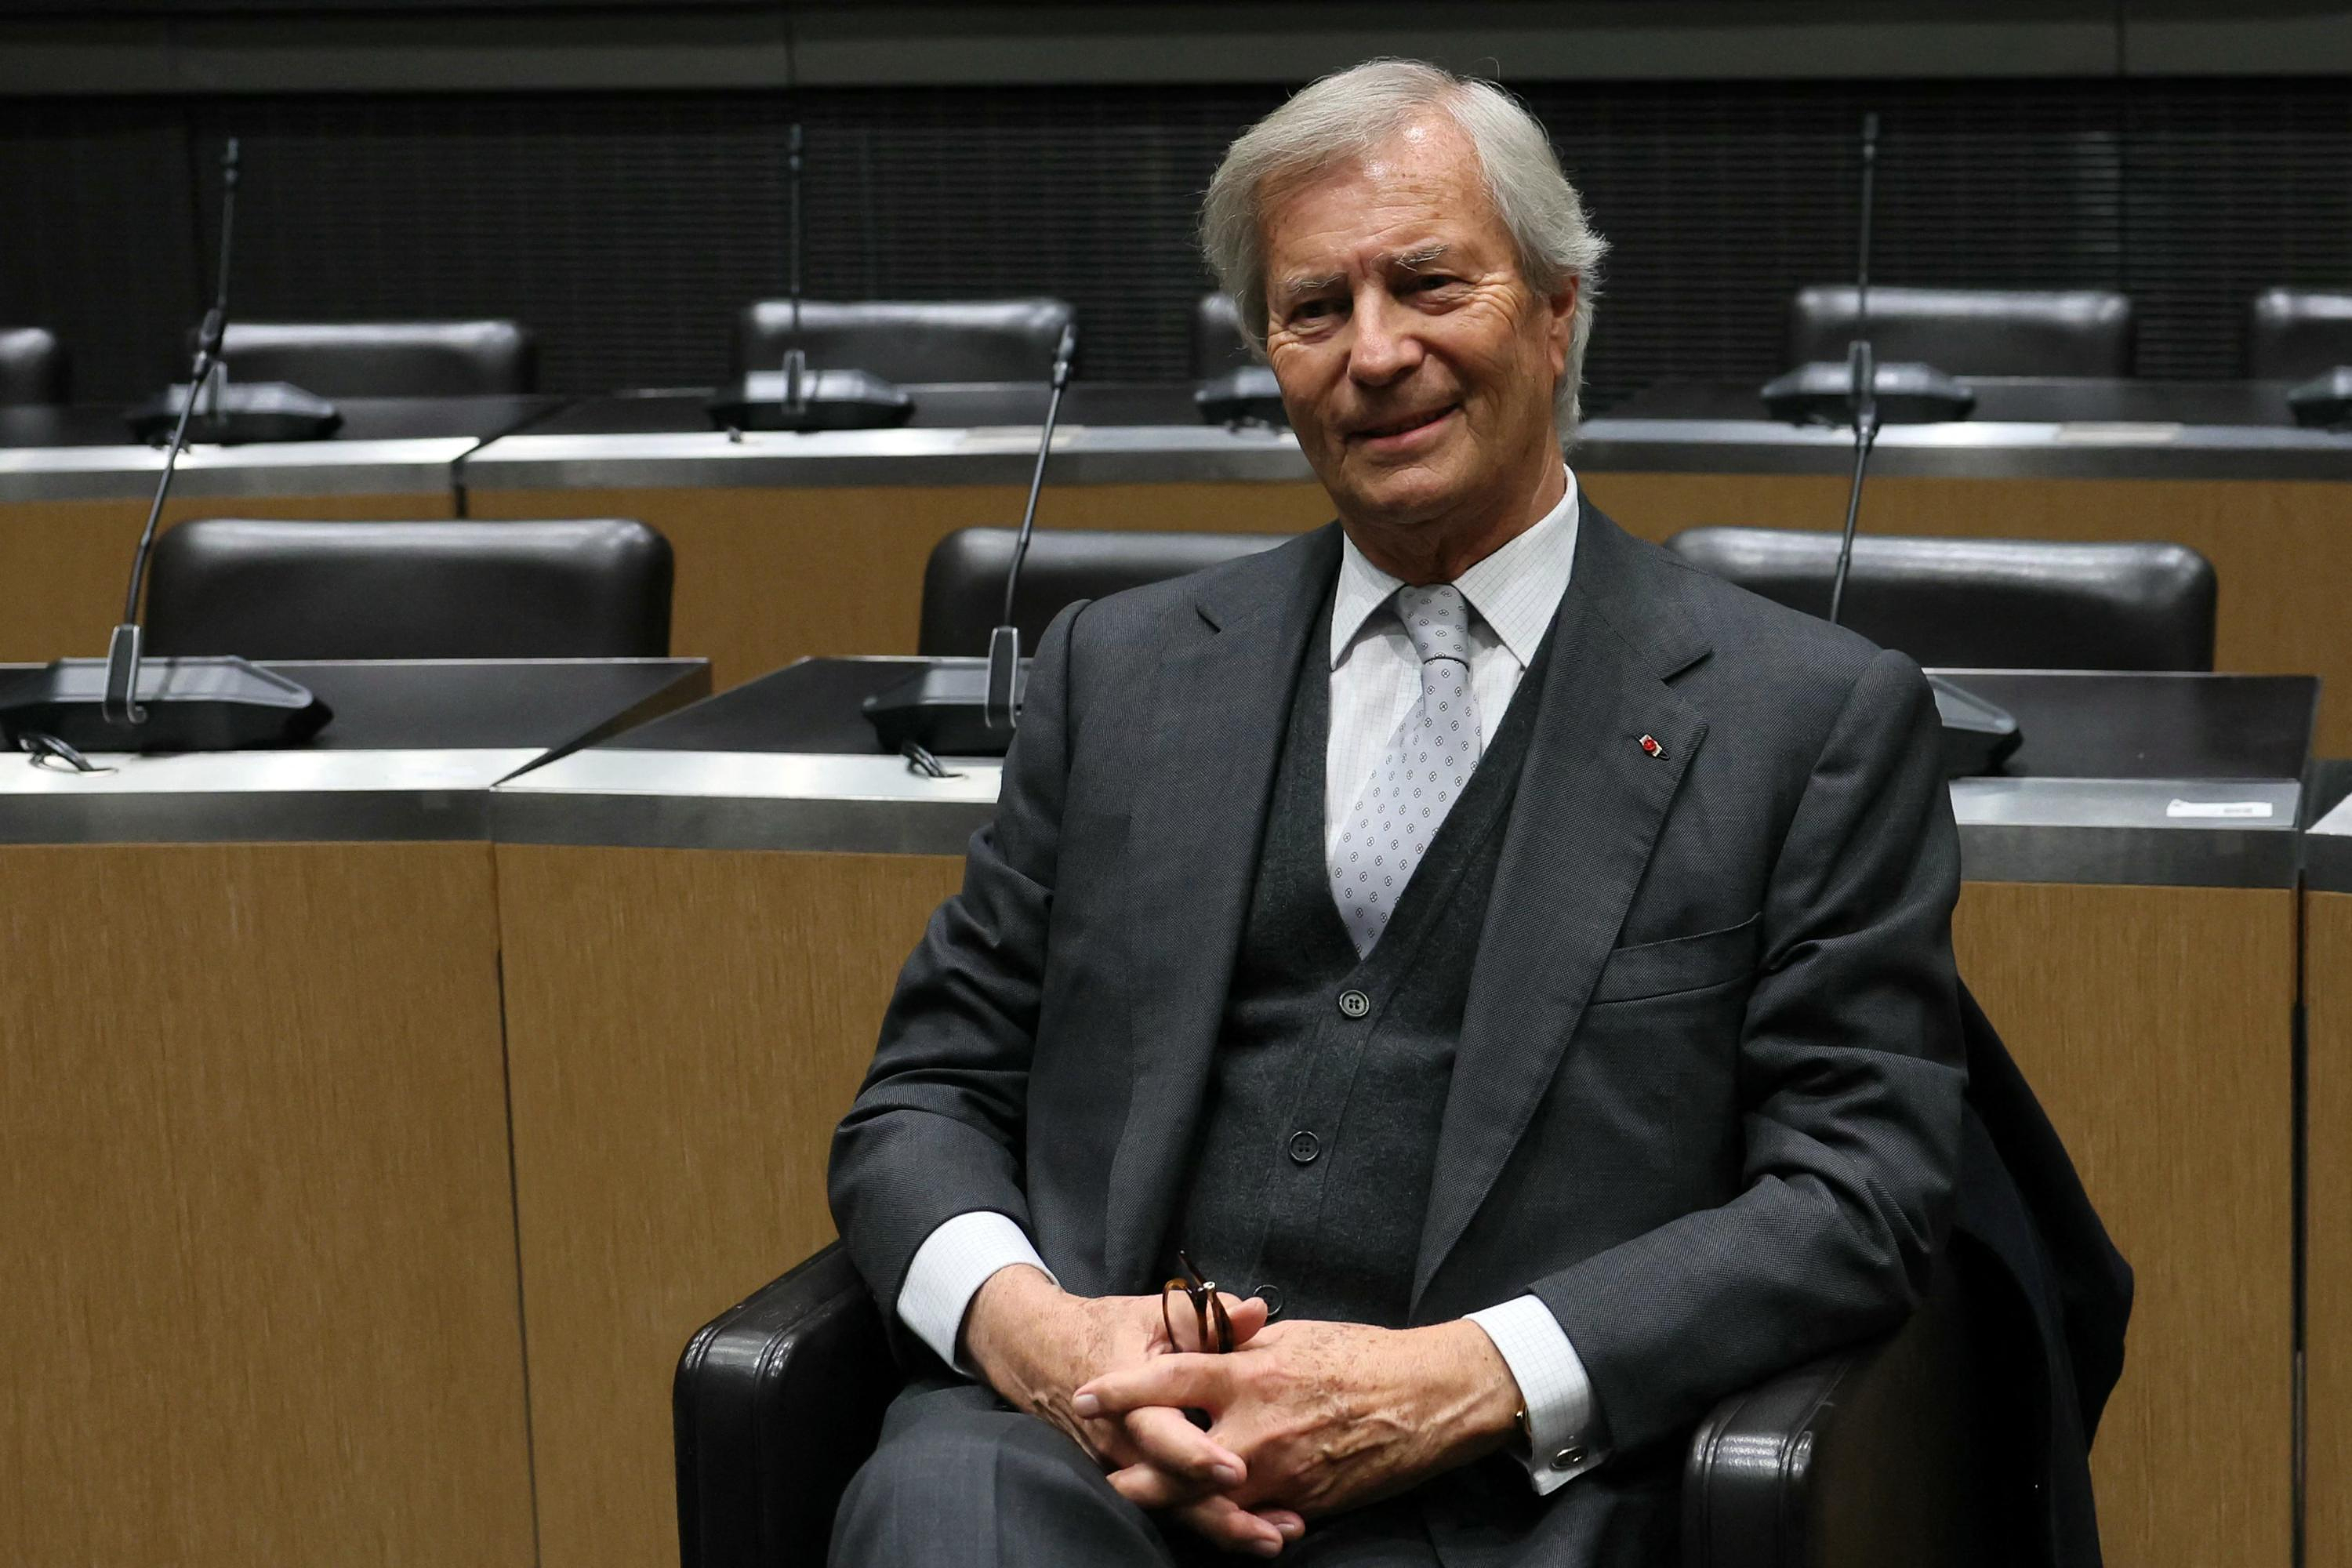 The withdrawal of TV frequencies from CNews or C8 “would be taken like a slap in the face”, according to Vincent Bolloré